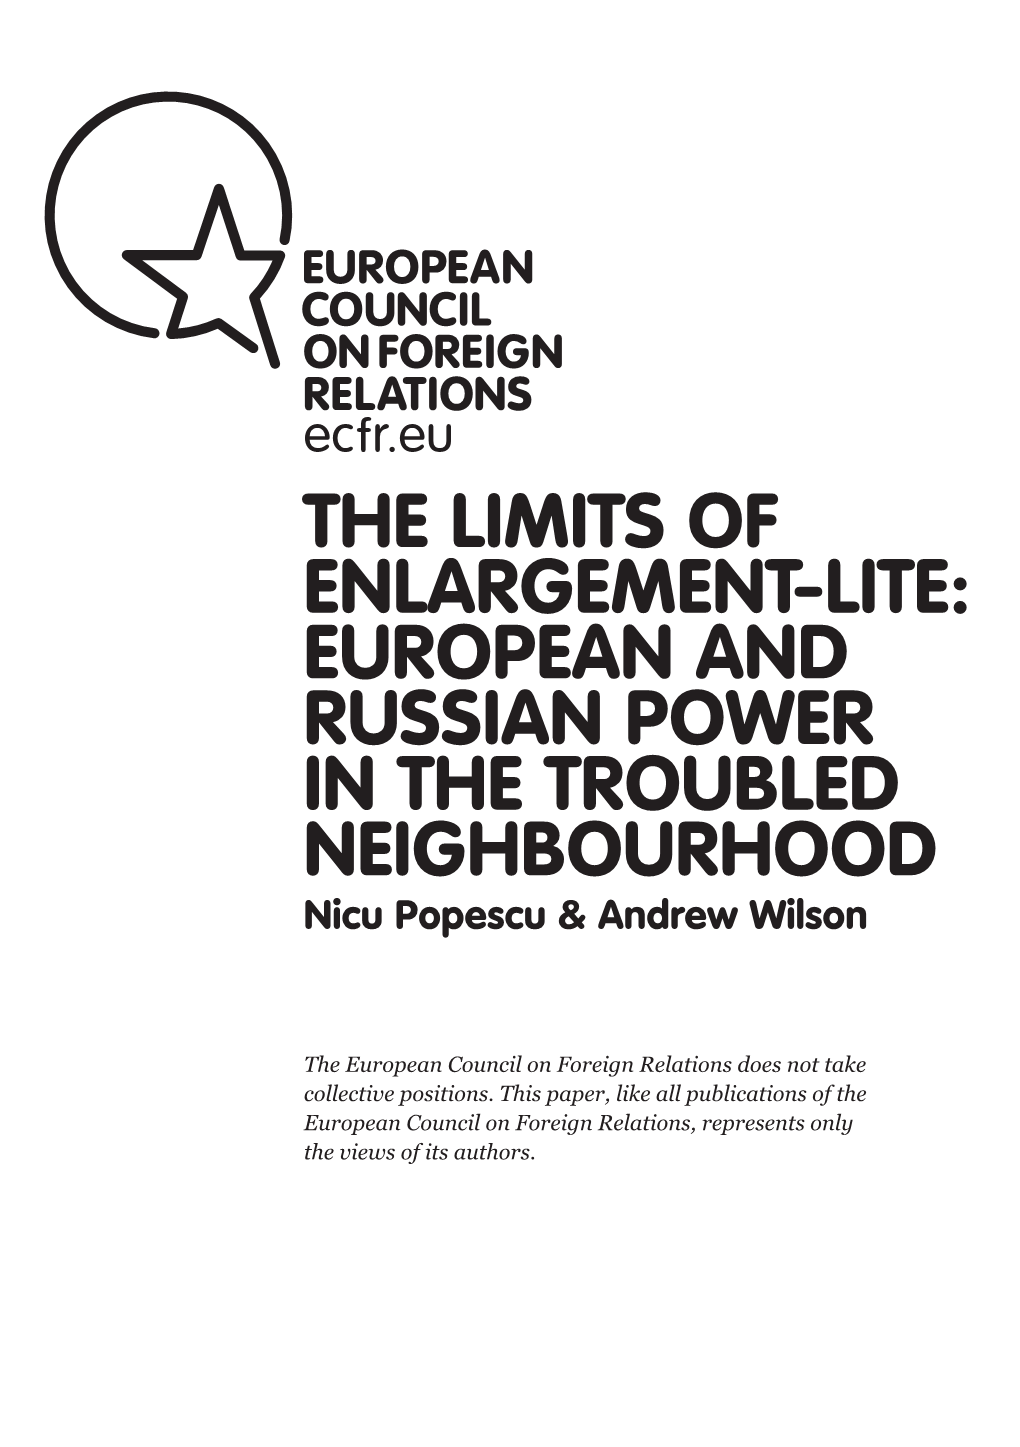 European and Russian Power in the Troubled Neighbourhood Nicu Popescu & Andrew Wilson